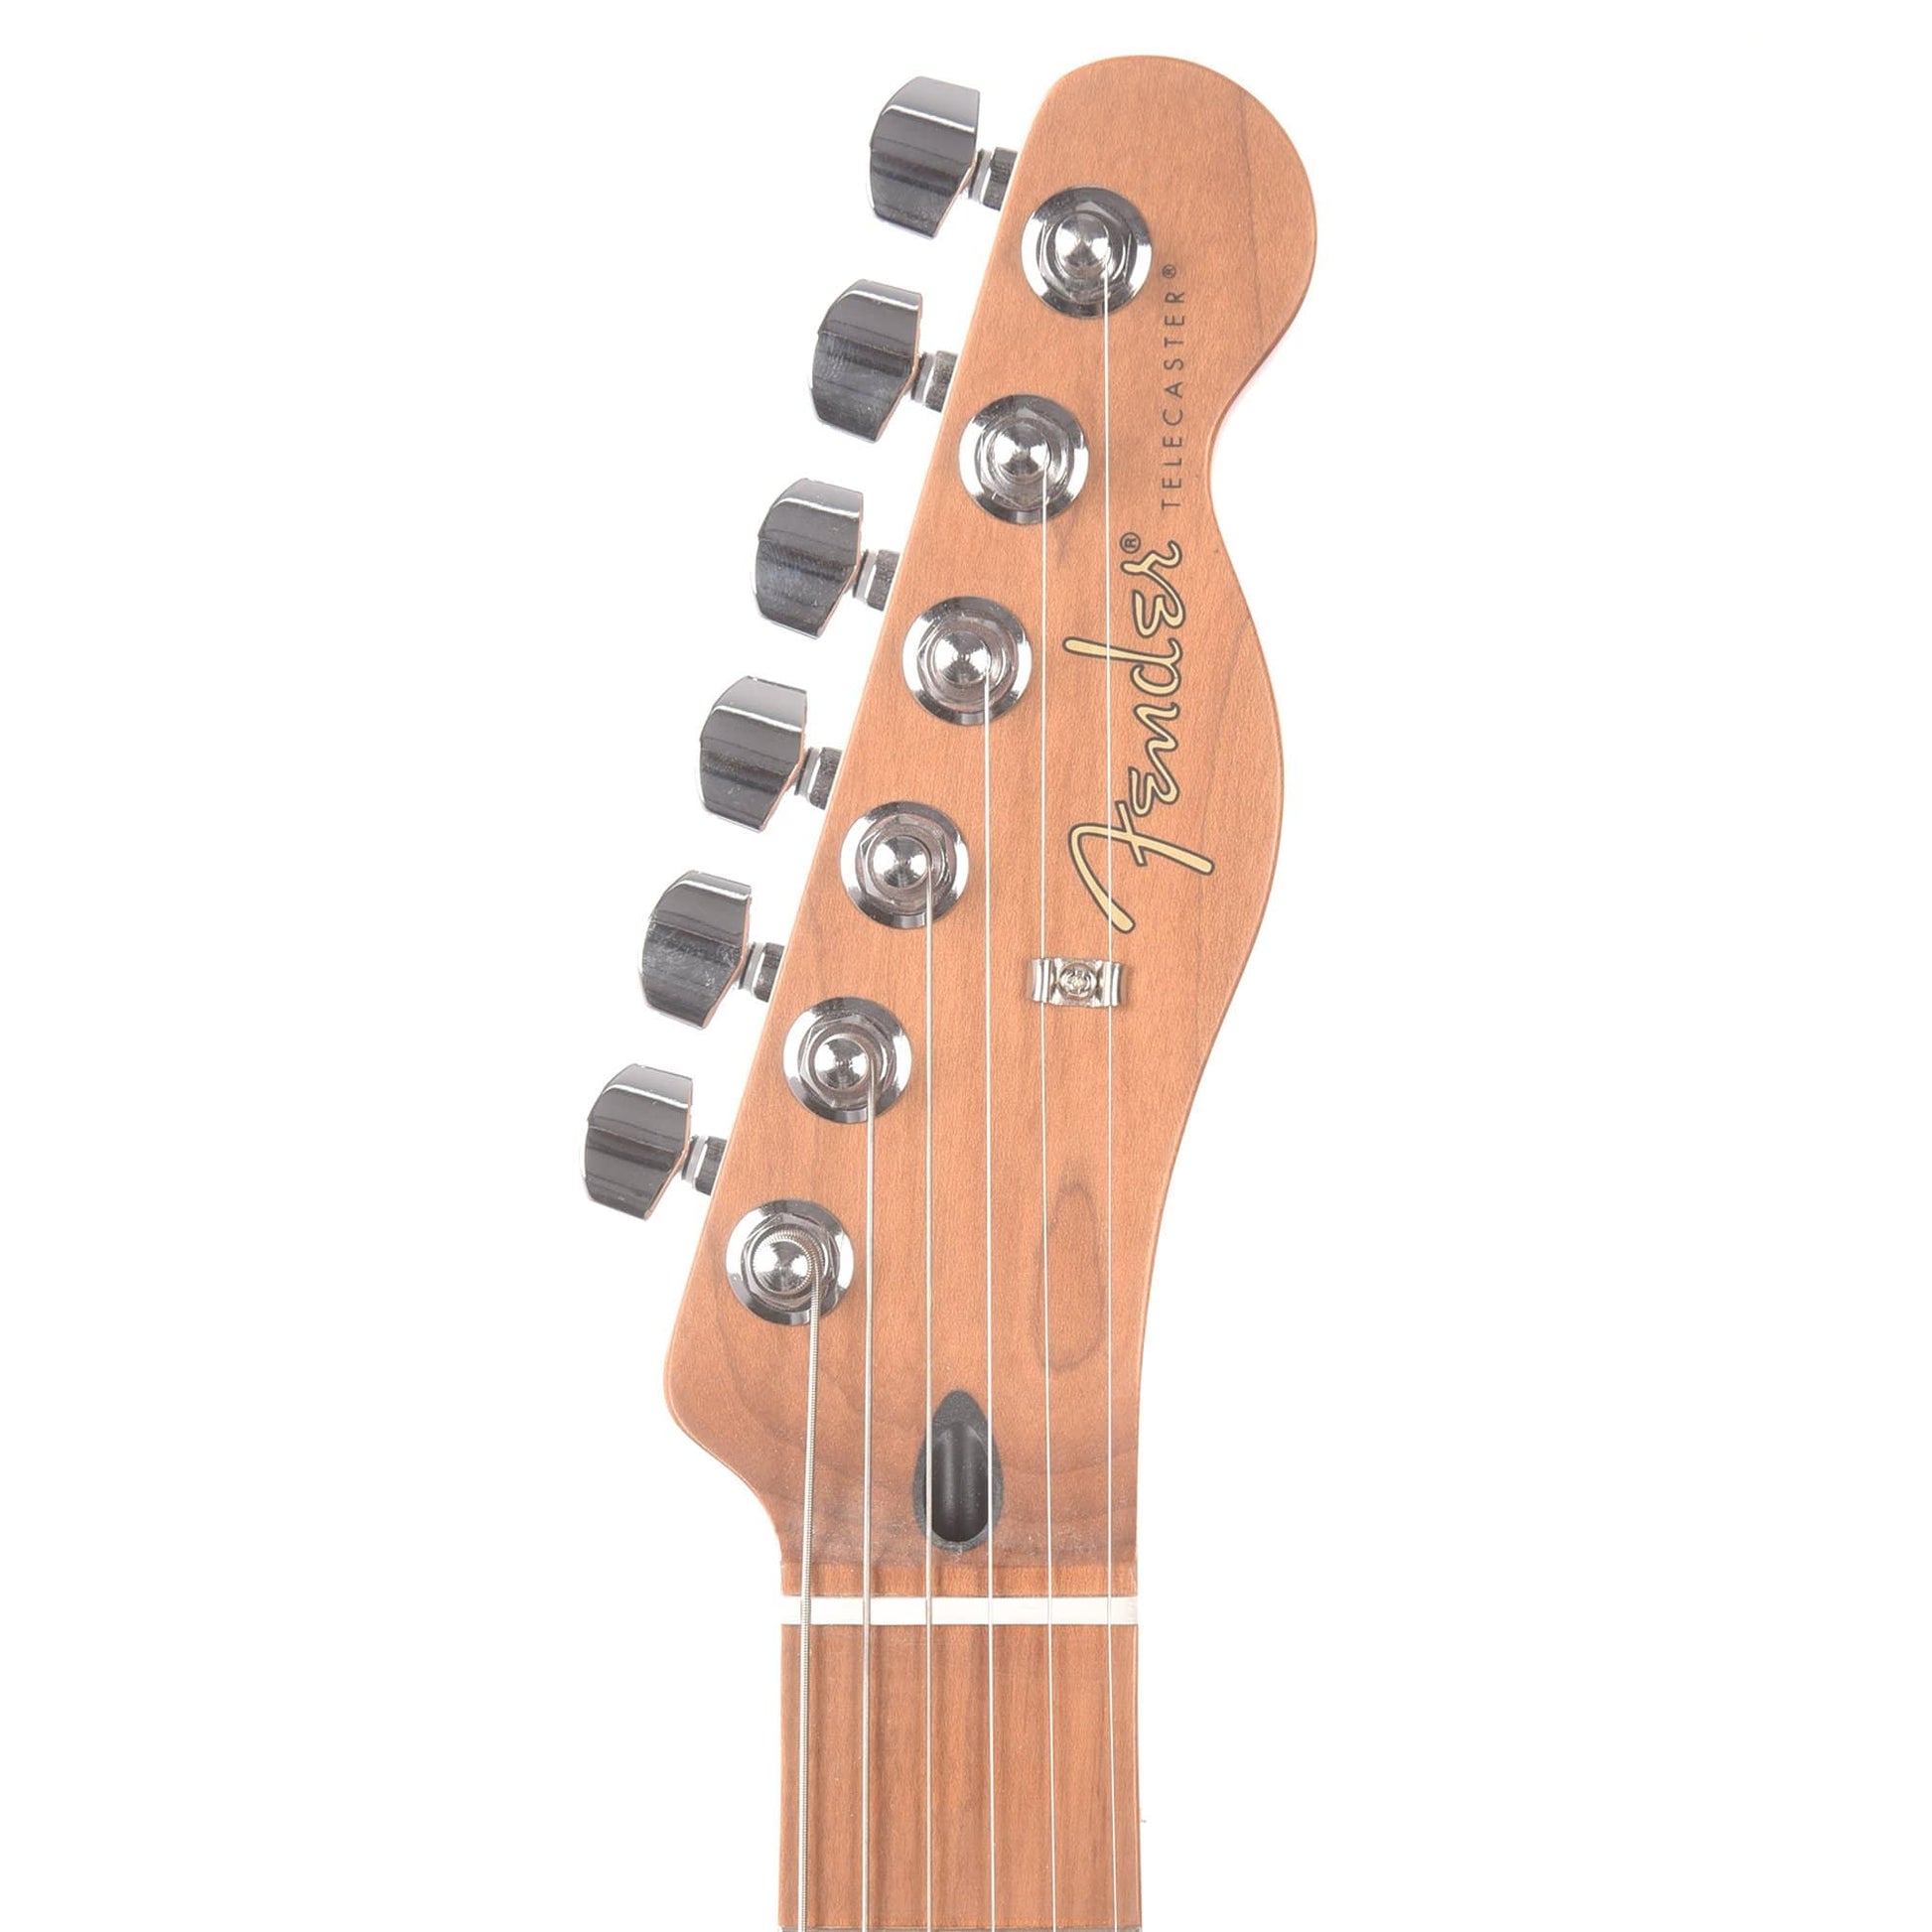 Fender Limited Edition Player Telecaster Butterscotch Blonde w/Roasted Maple Neck Electric Guitars / Solid Body